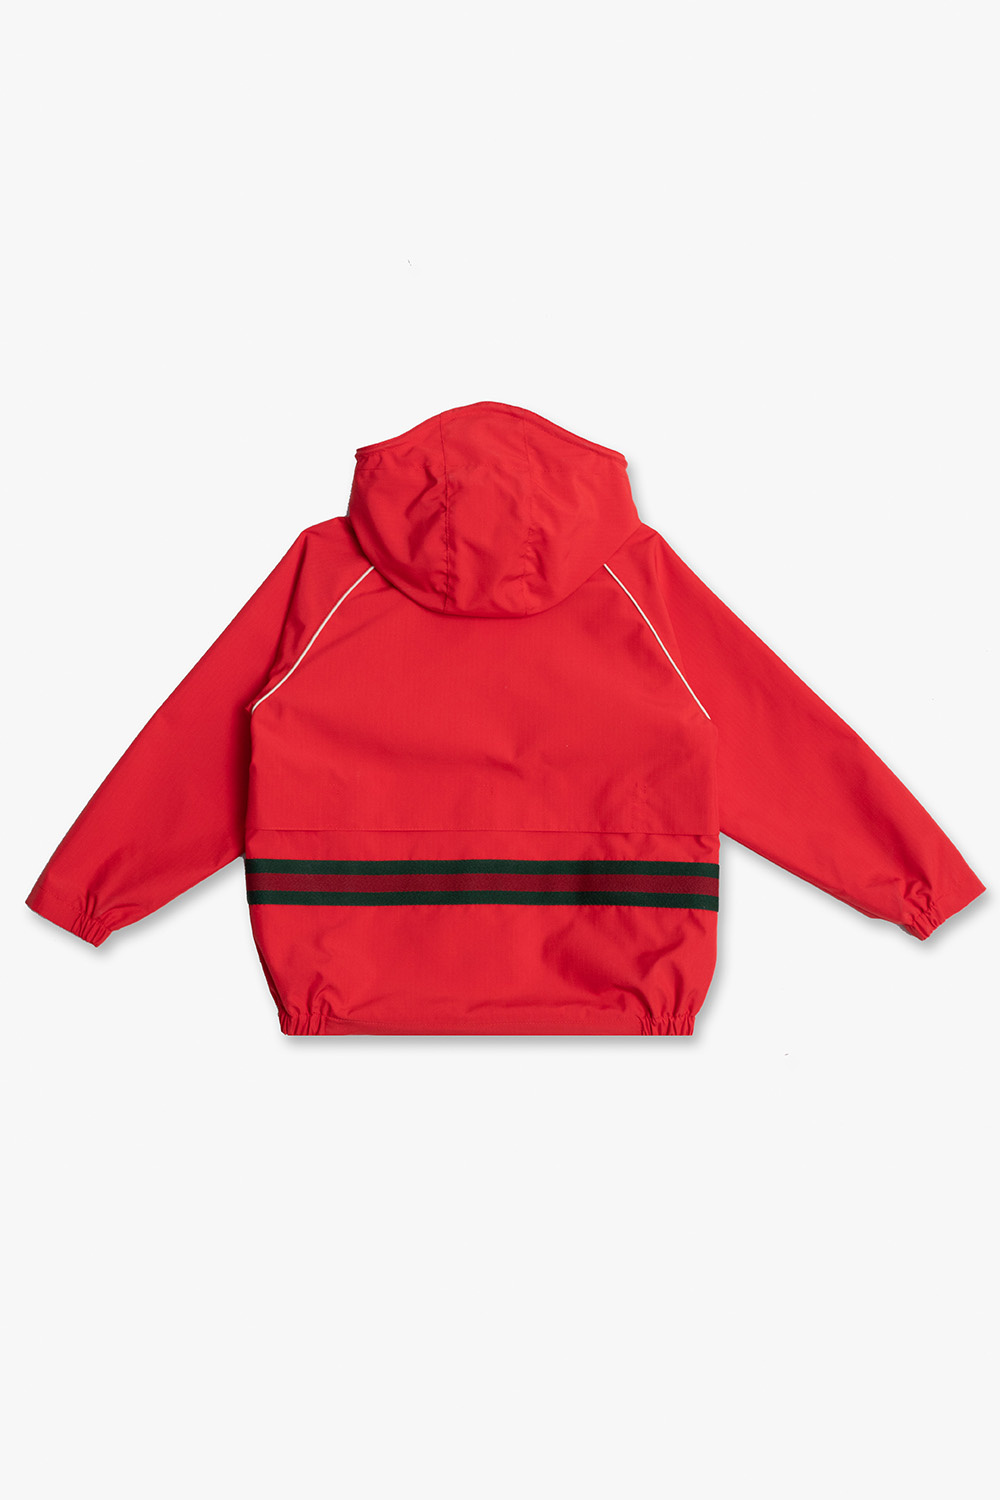 gucci Top Kids Jacket with logo